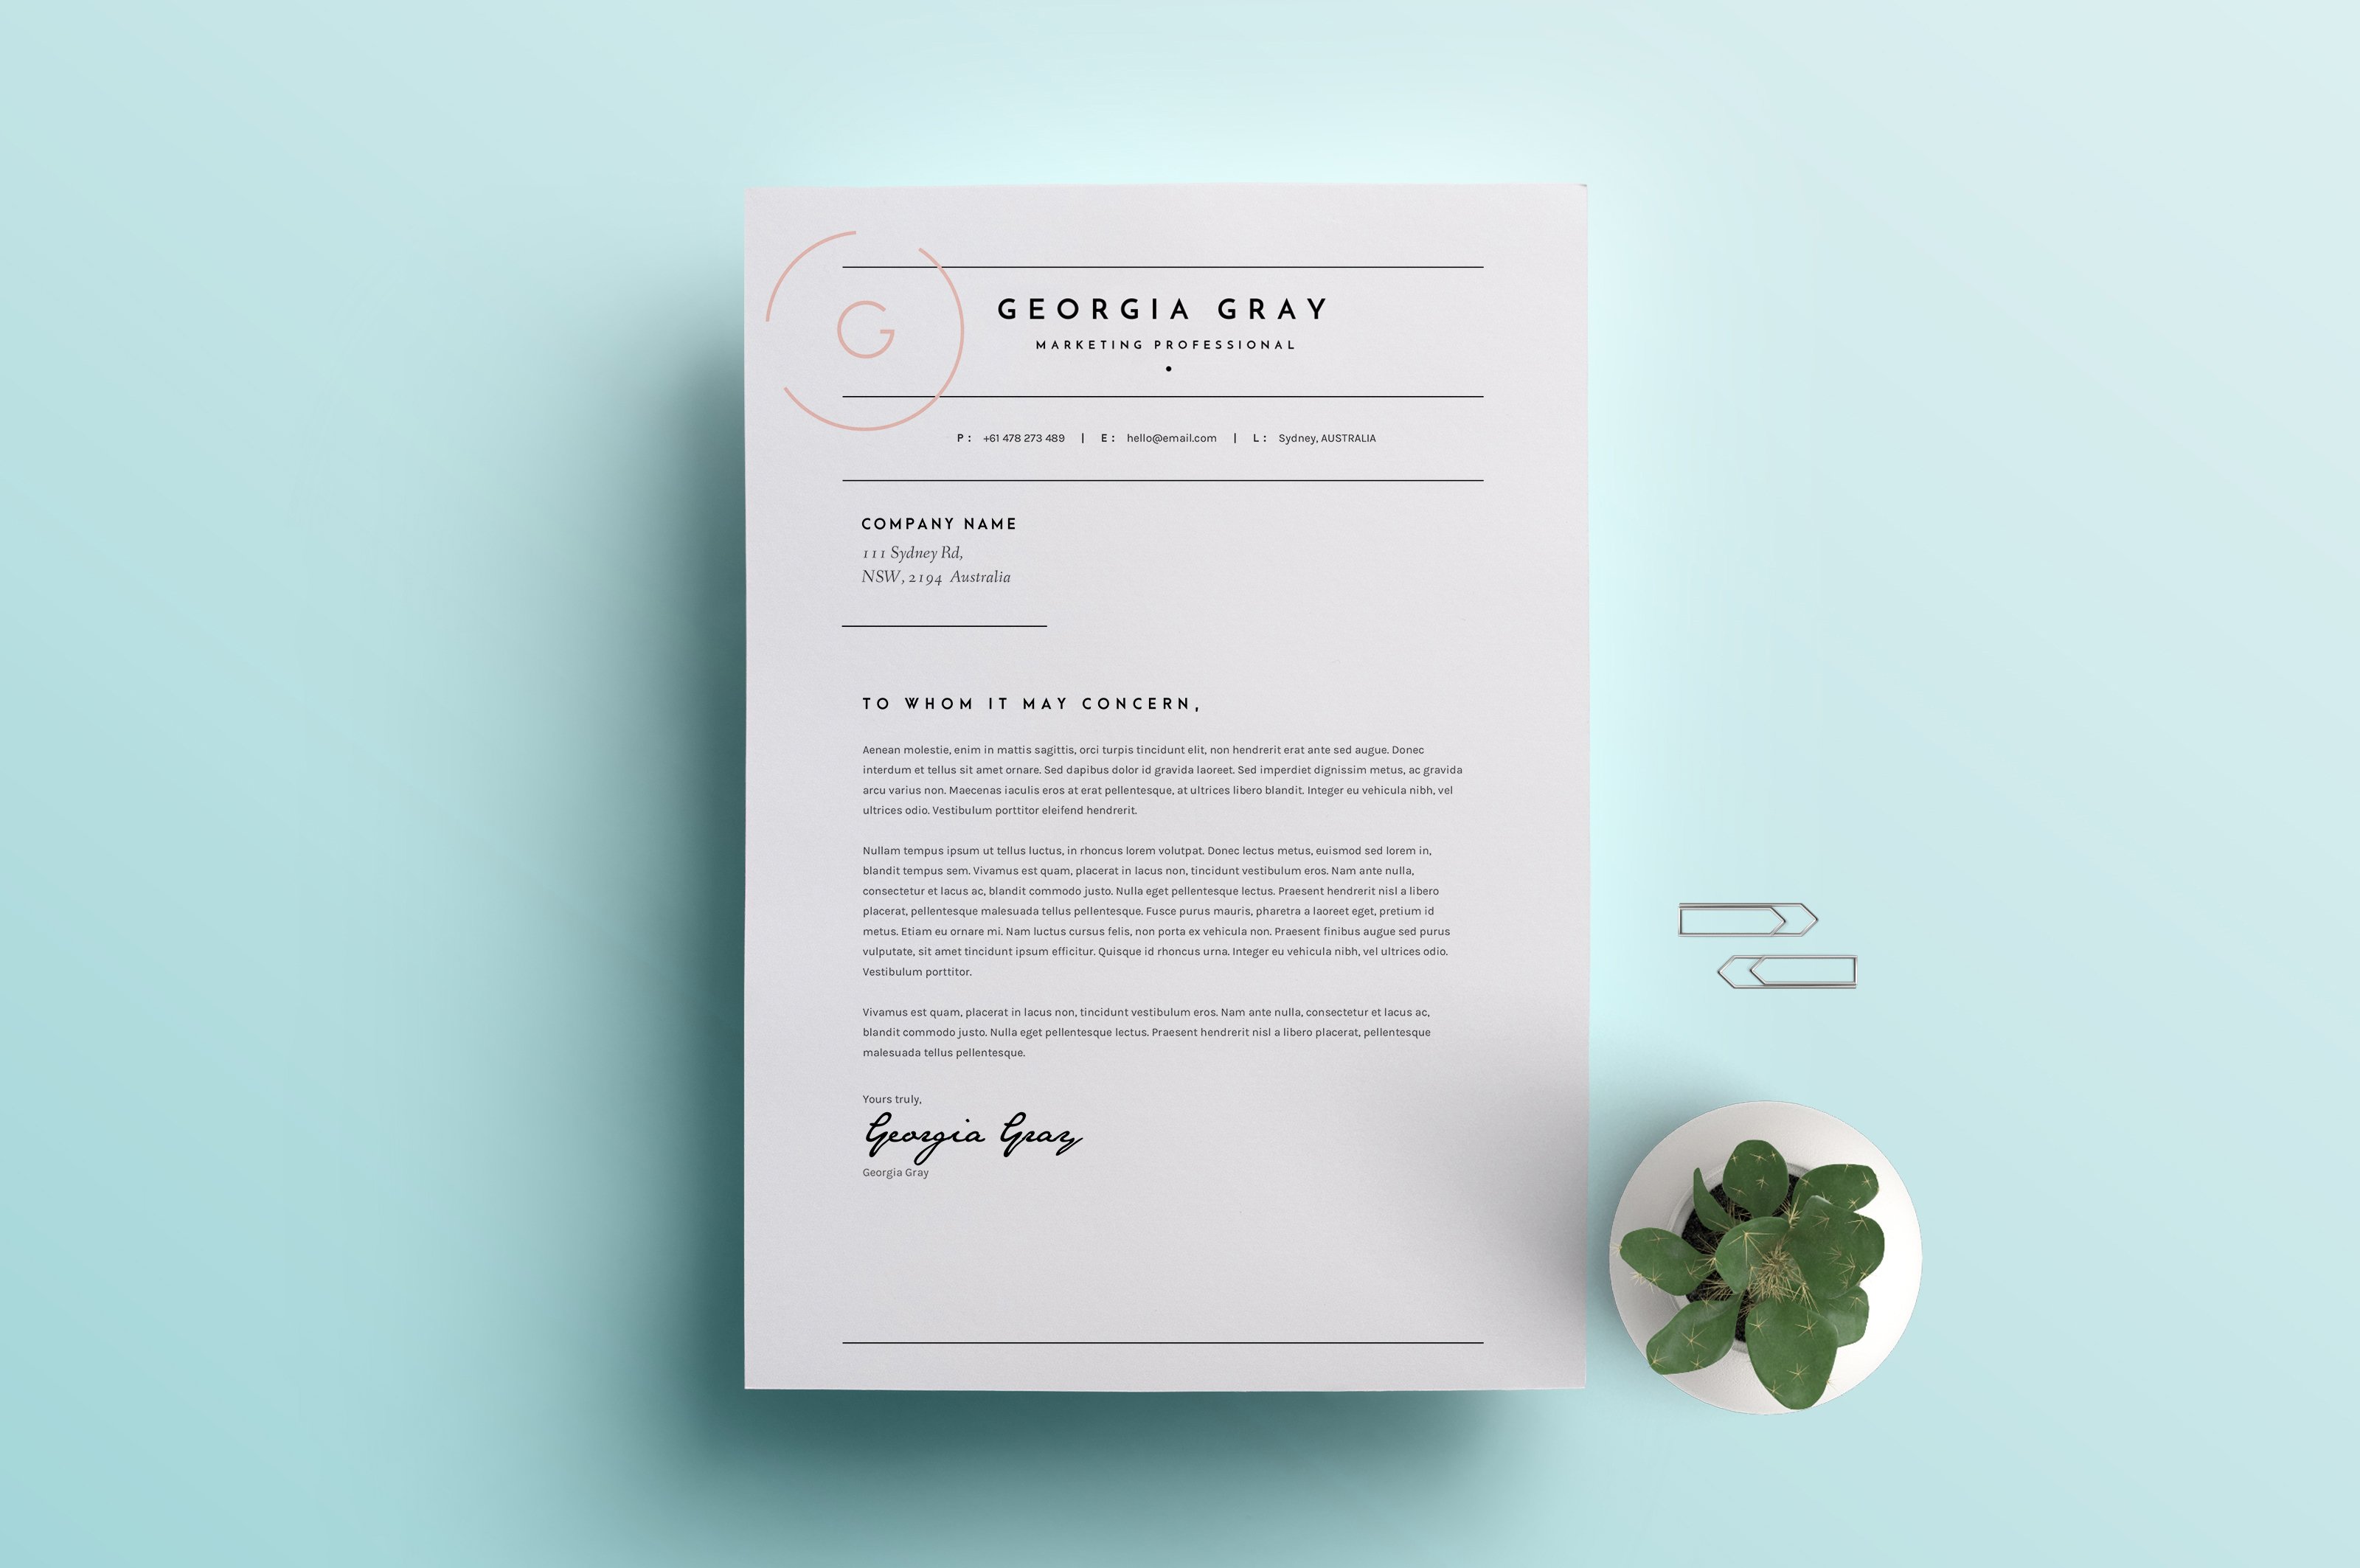 Letterhead with a plant on top of it.